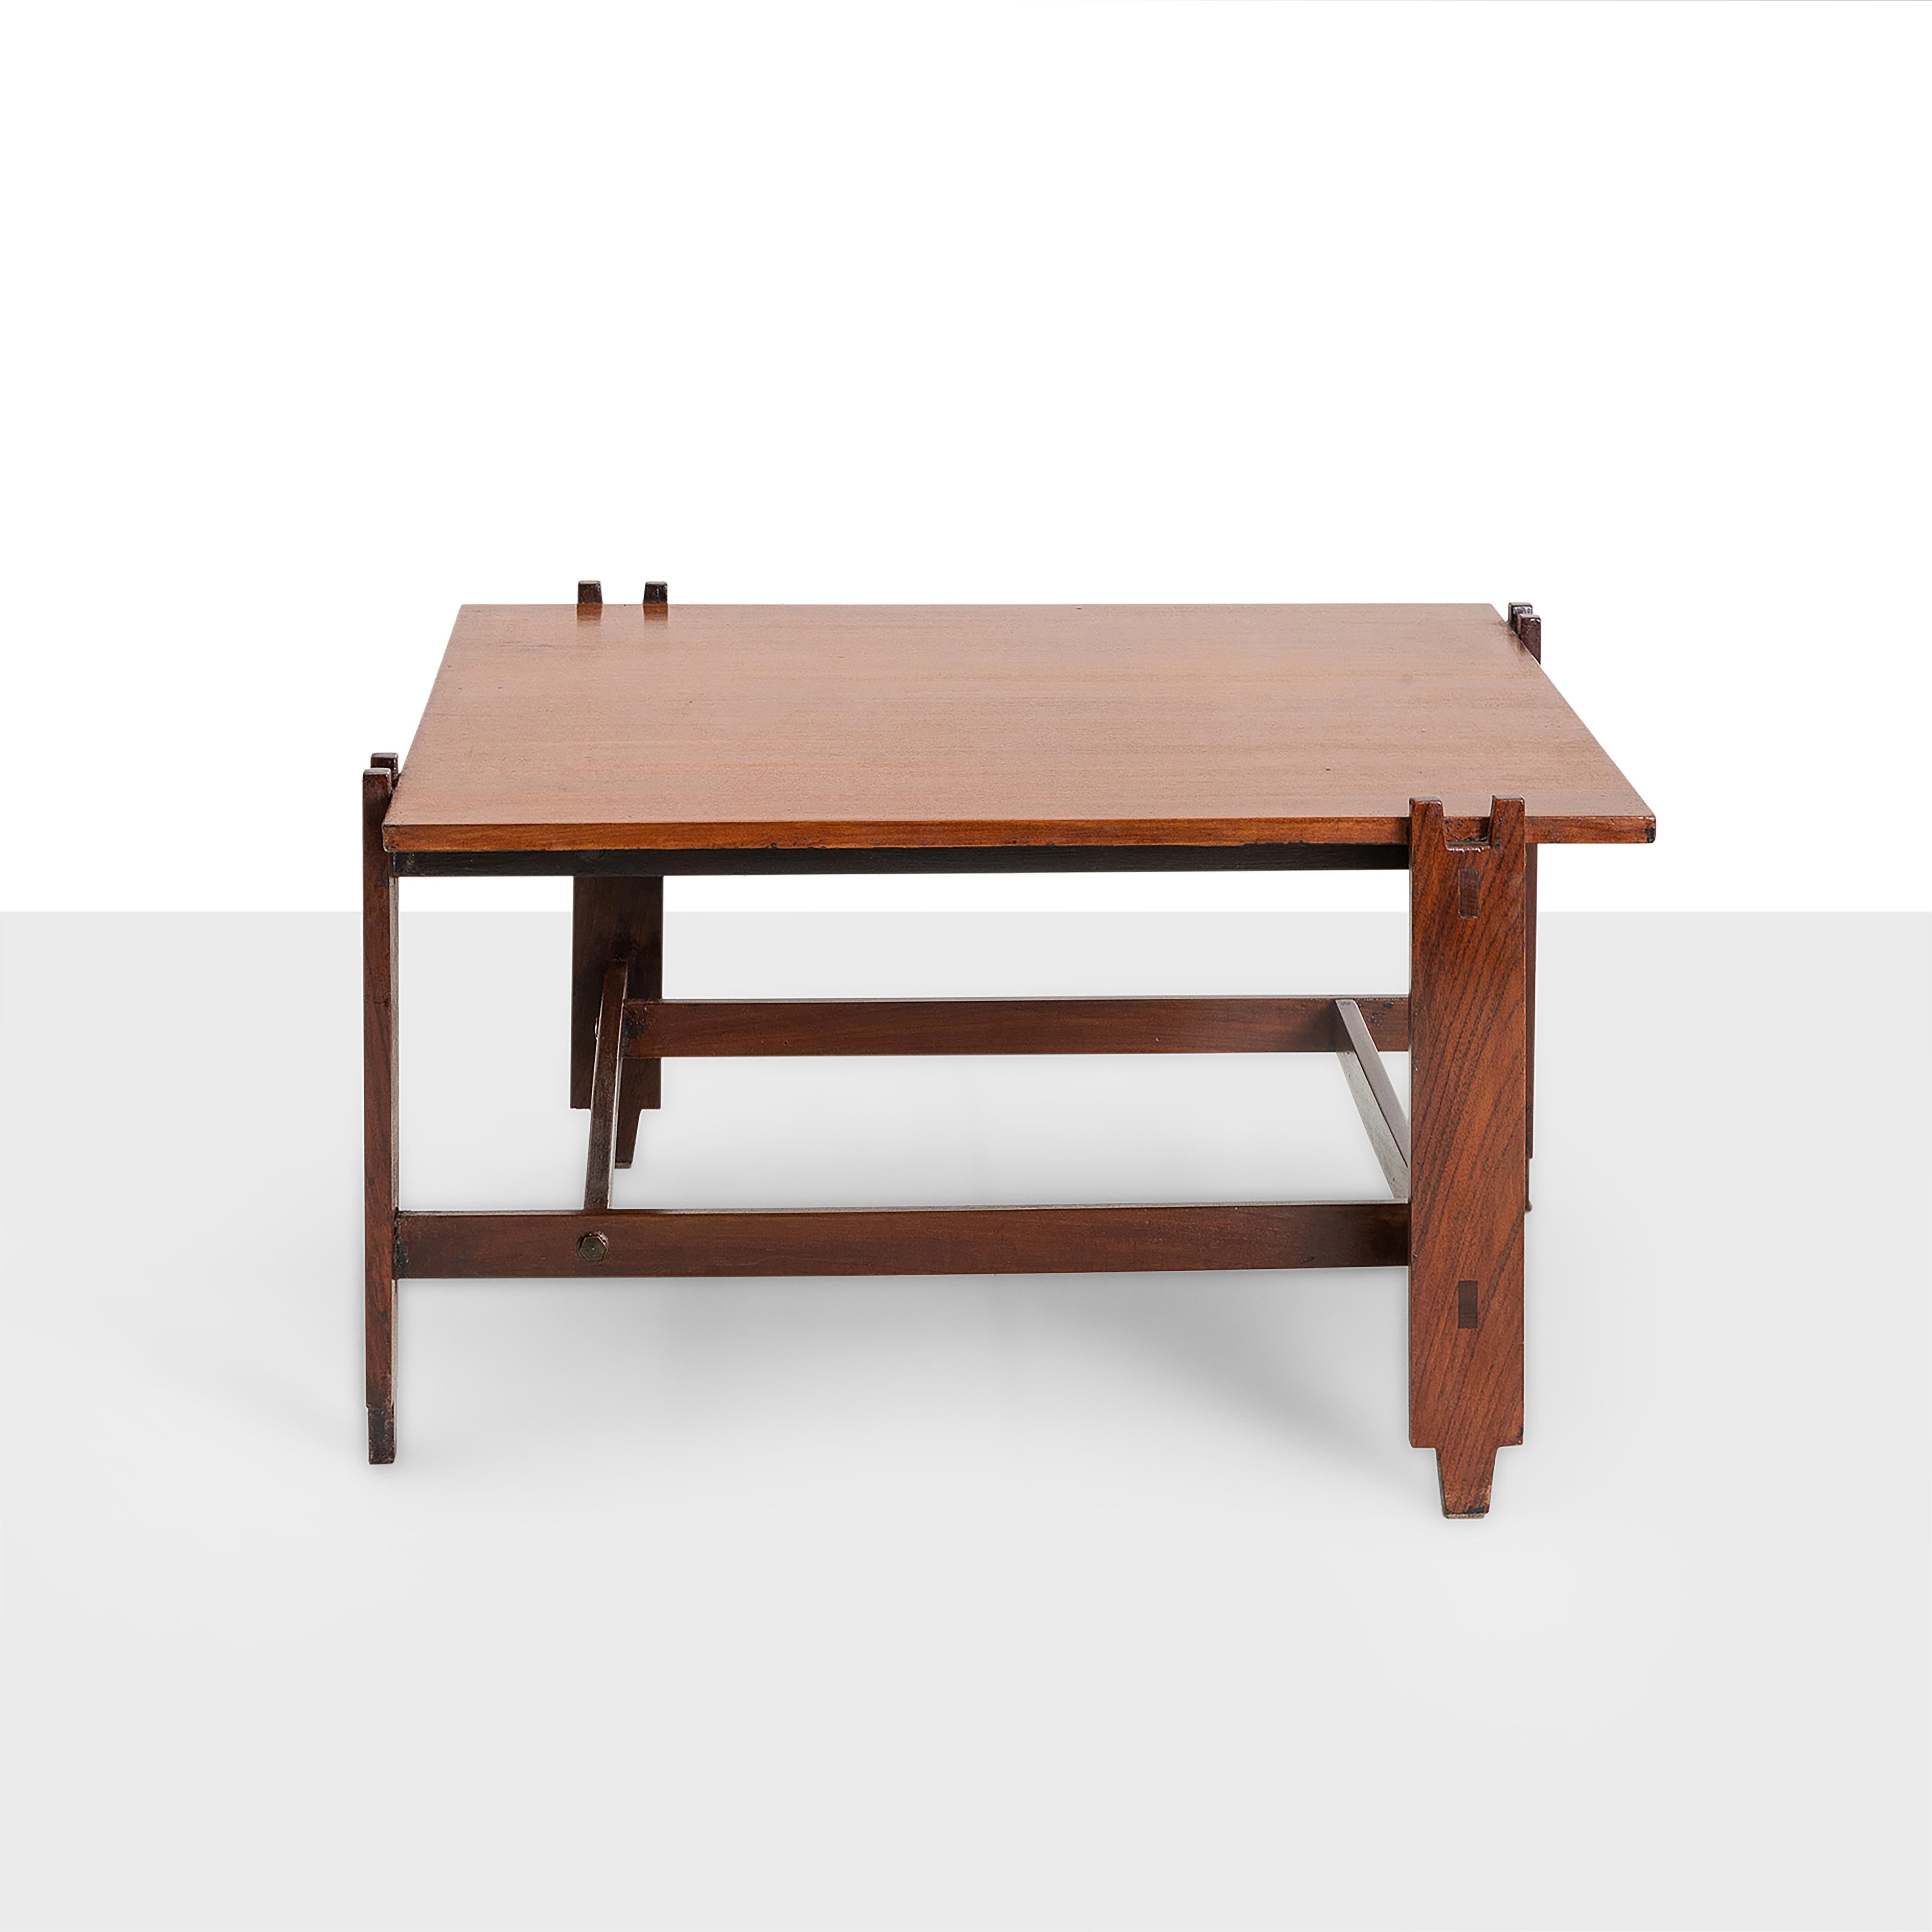 1960s Cassina wooden table with a square base and staggered inserted legs. It is a low table that can be used in different rooms and occasions. The Italian manufacturer Cassina is famous for its versatile tables with distinctive shapes, easily